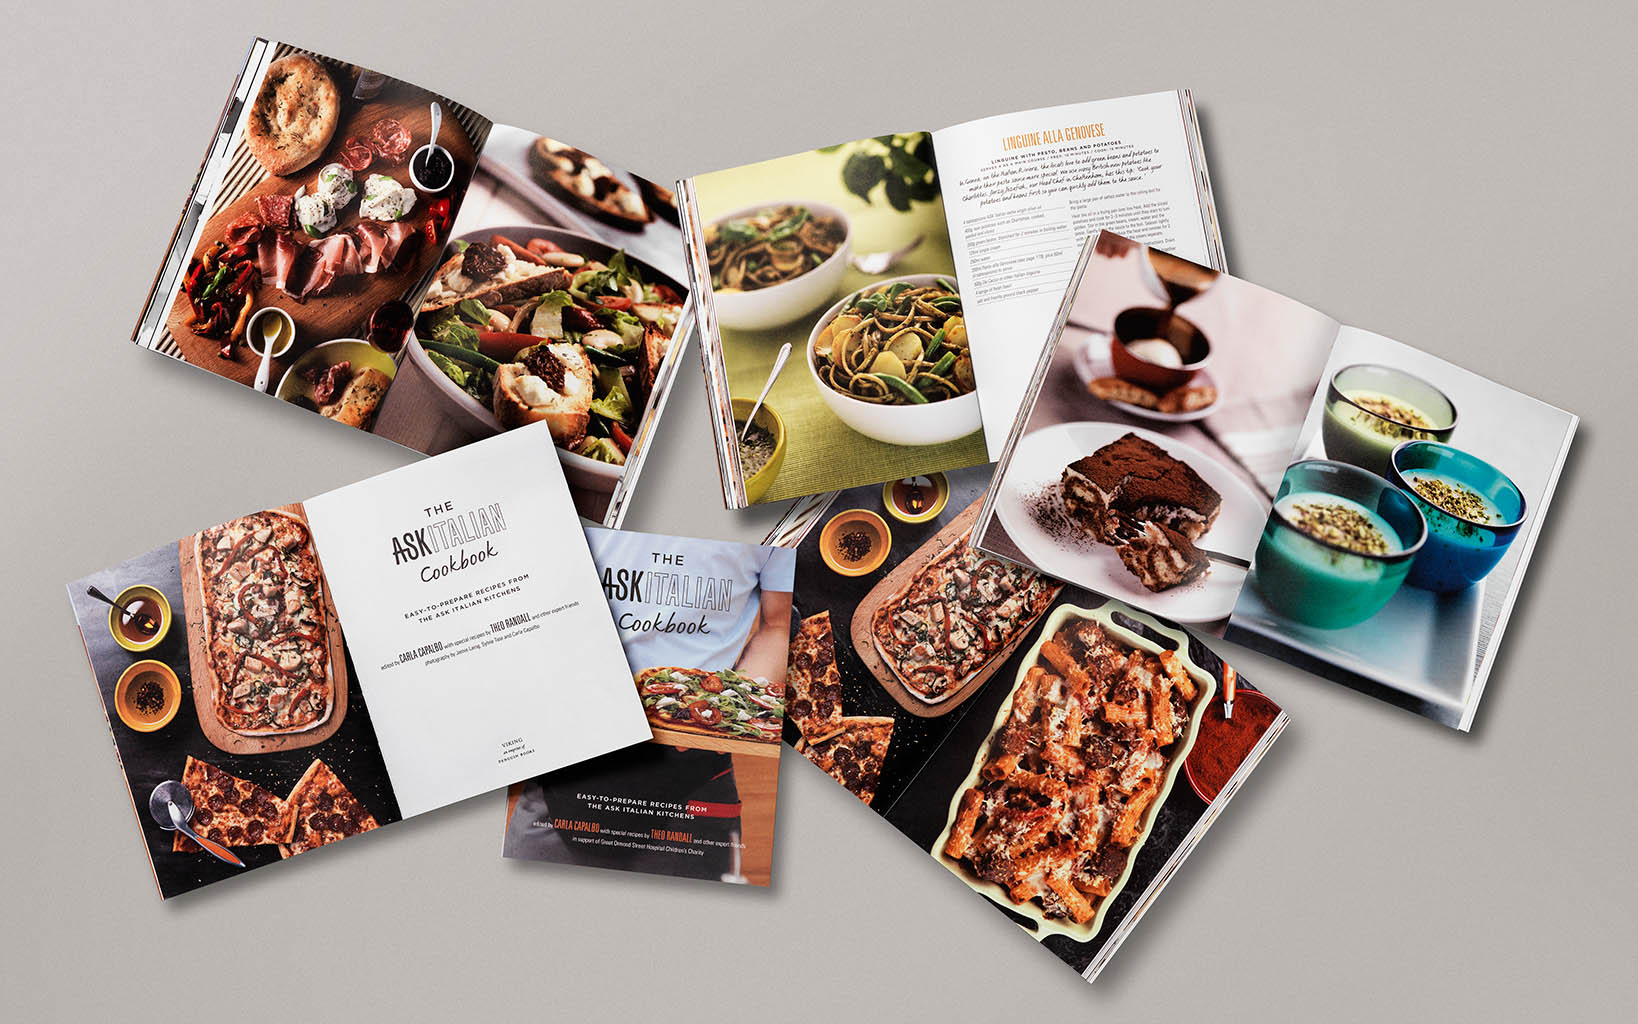 Artwork Photography of Ask Italian cook books by Packshot Factory